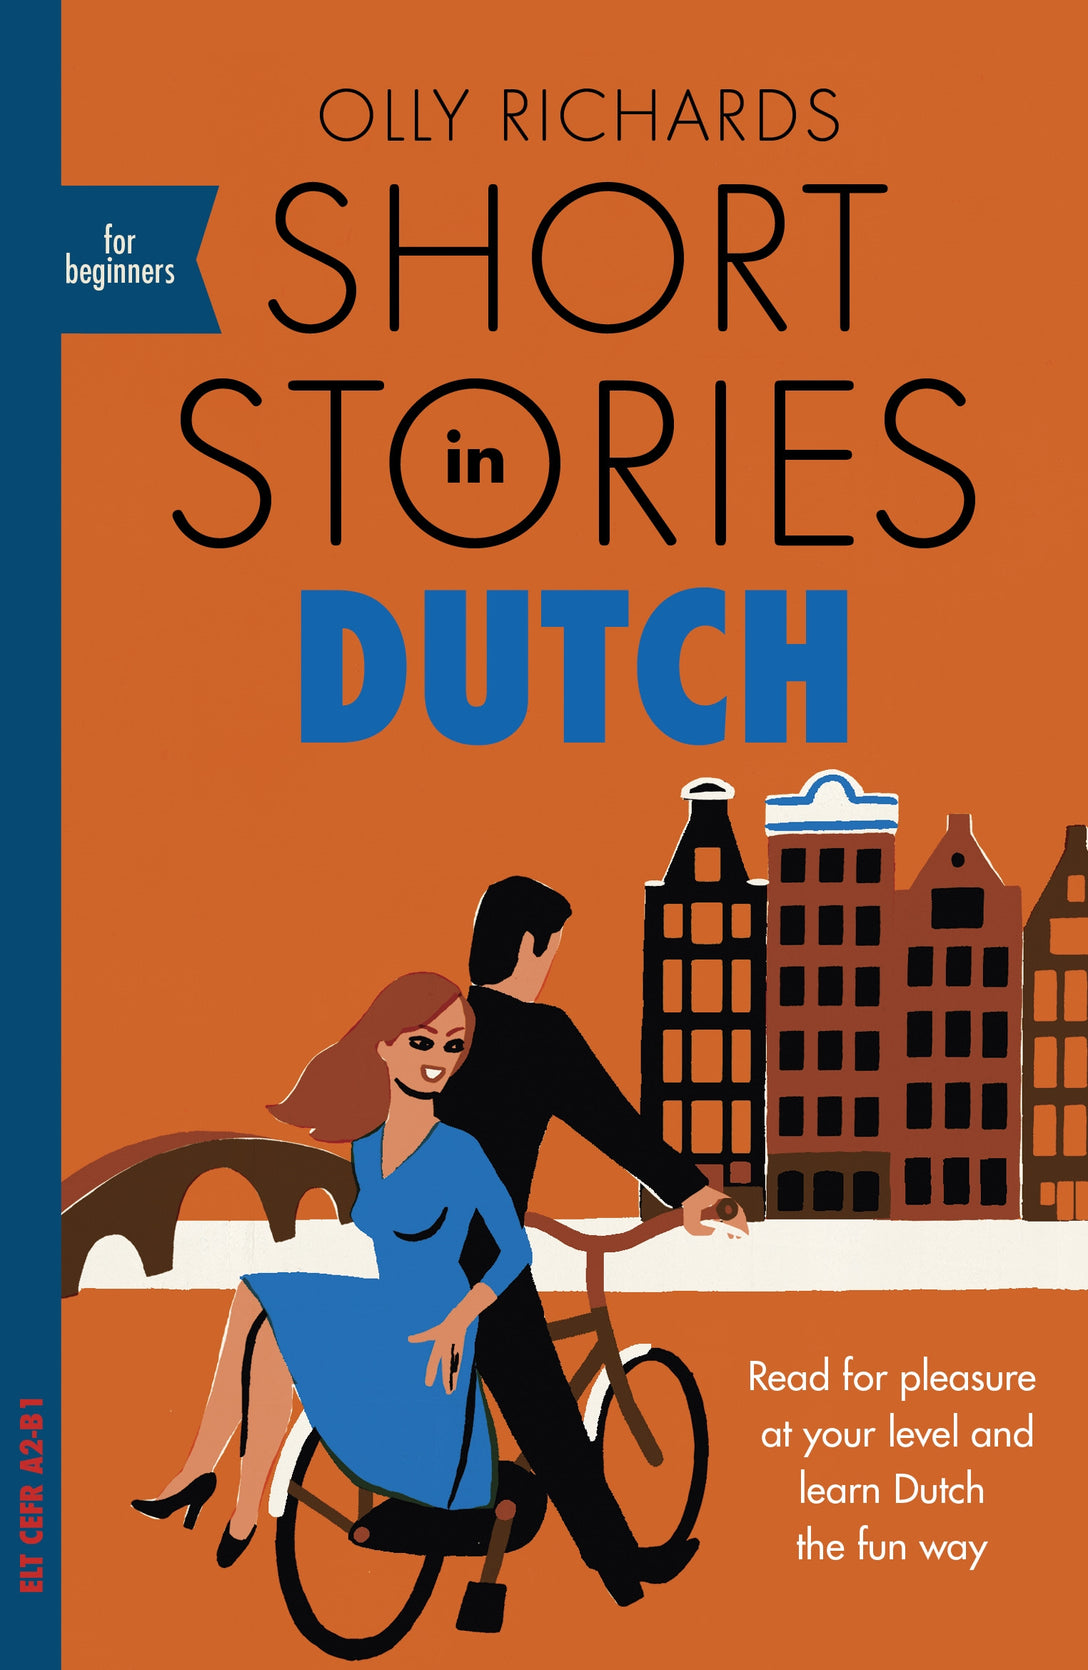 Short Stories in Dutch for Beginners by Olly Richards